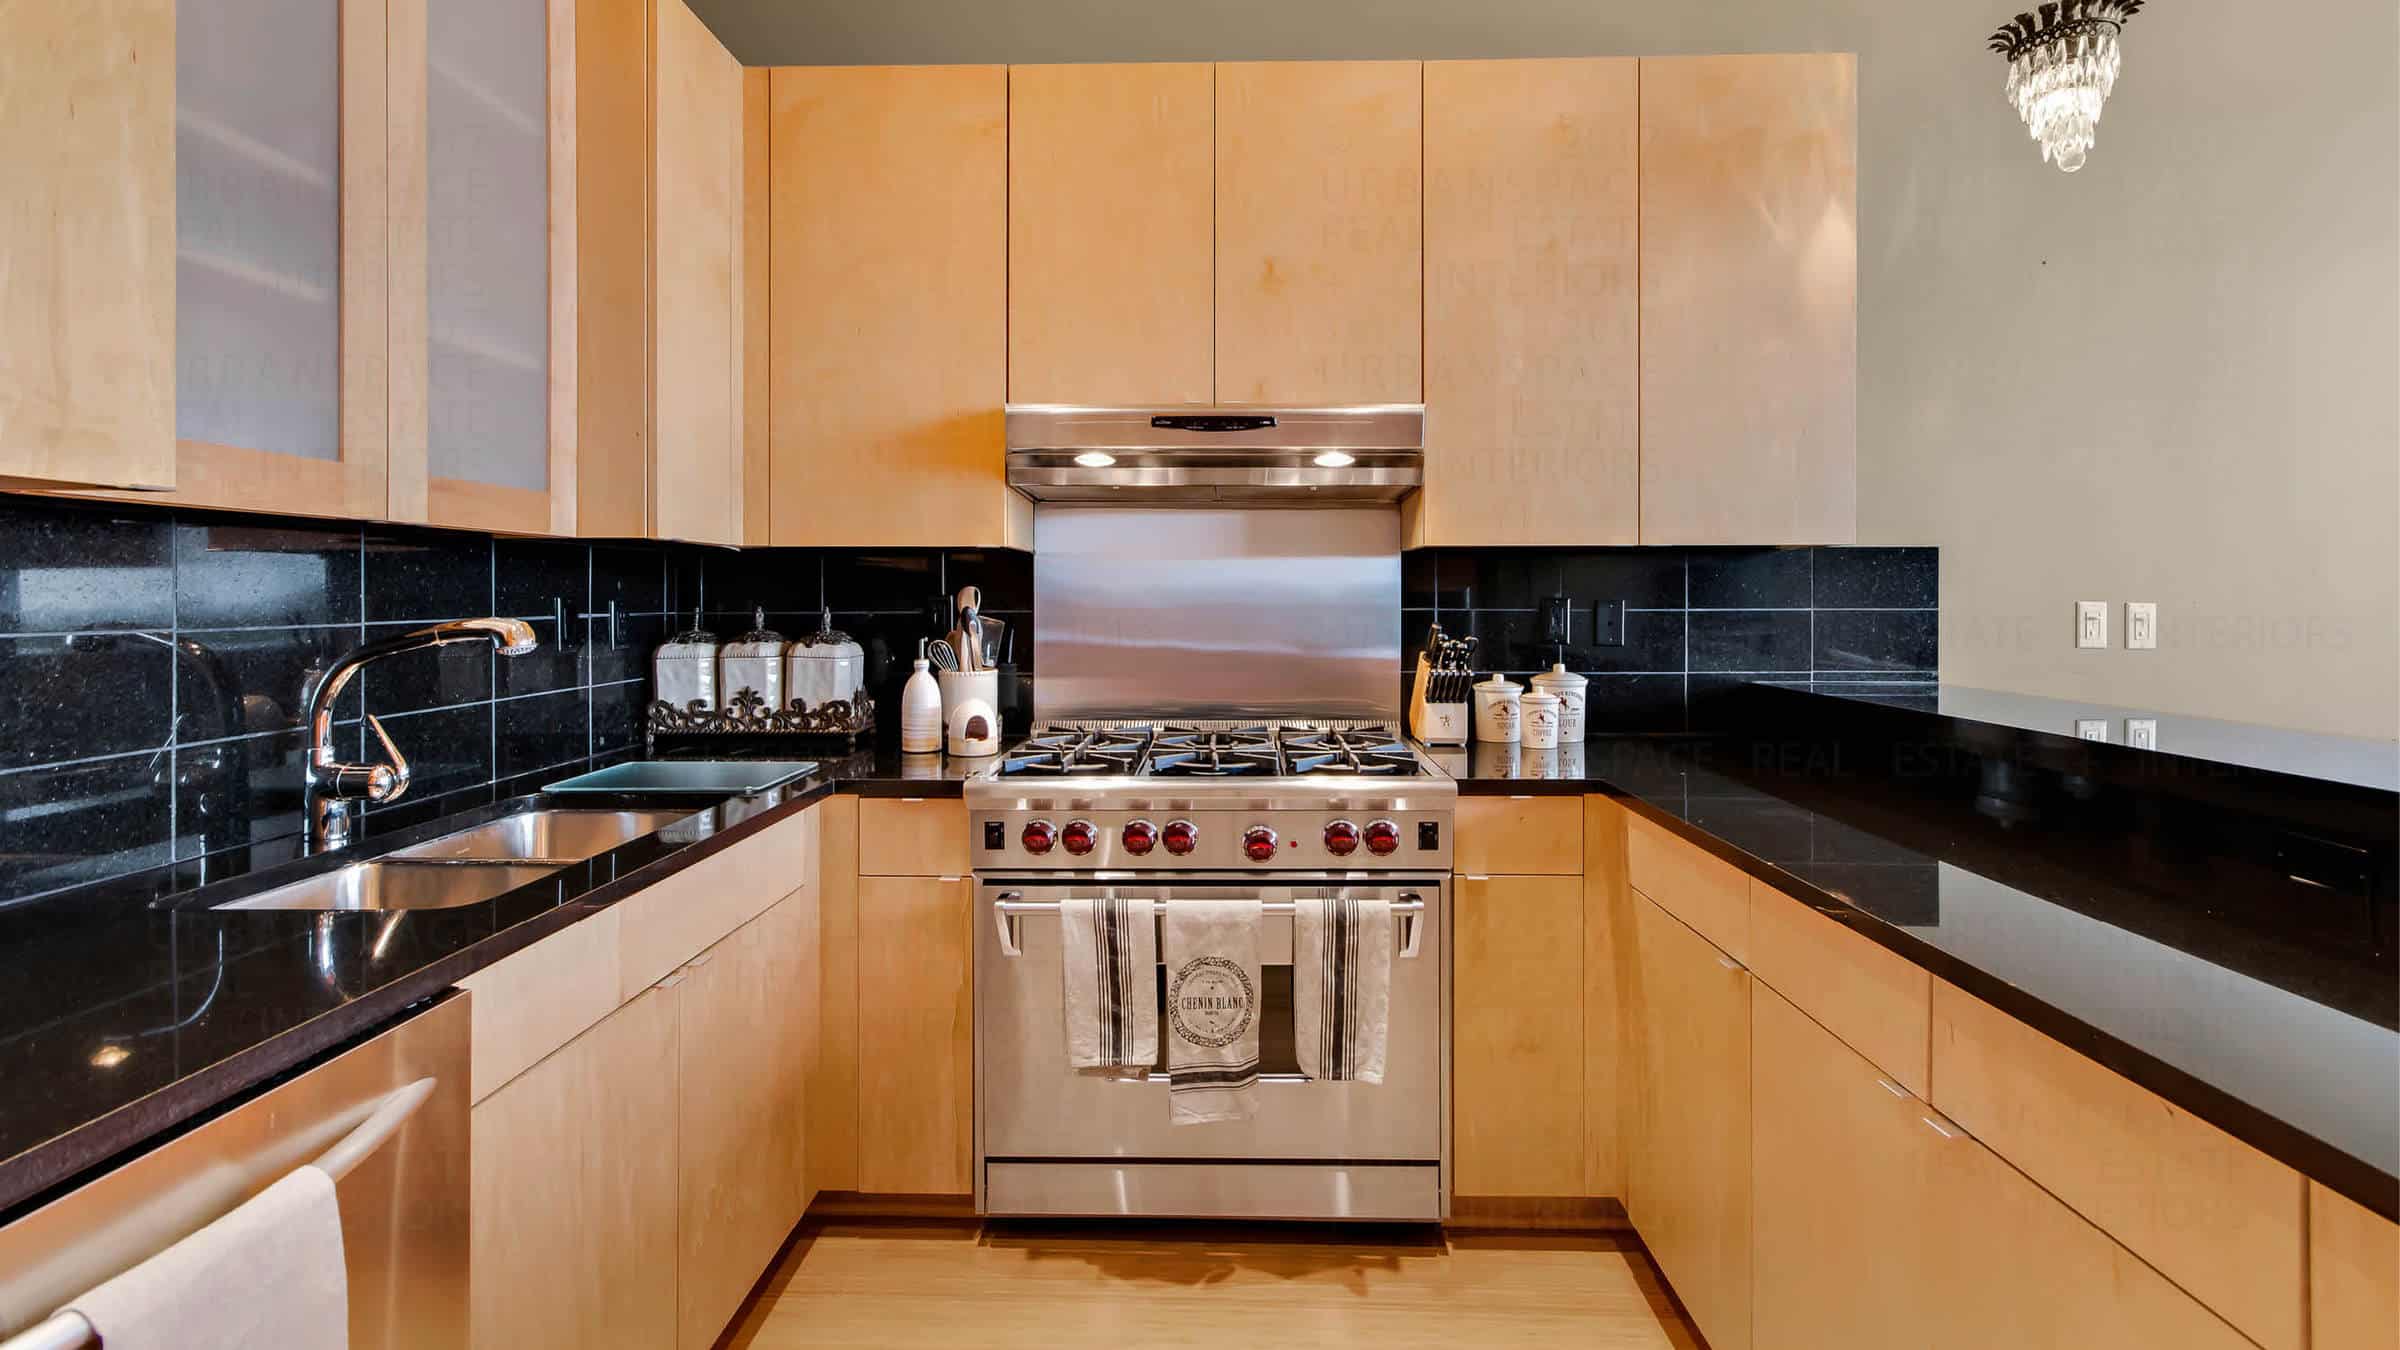 kitchen stainless steel appliances 5 fifty five austin downtown condo